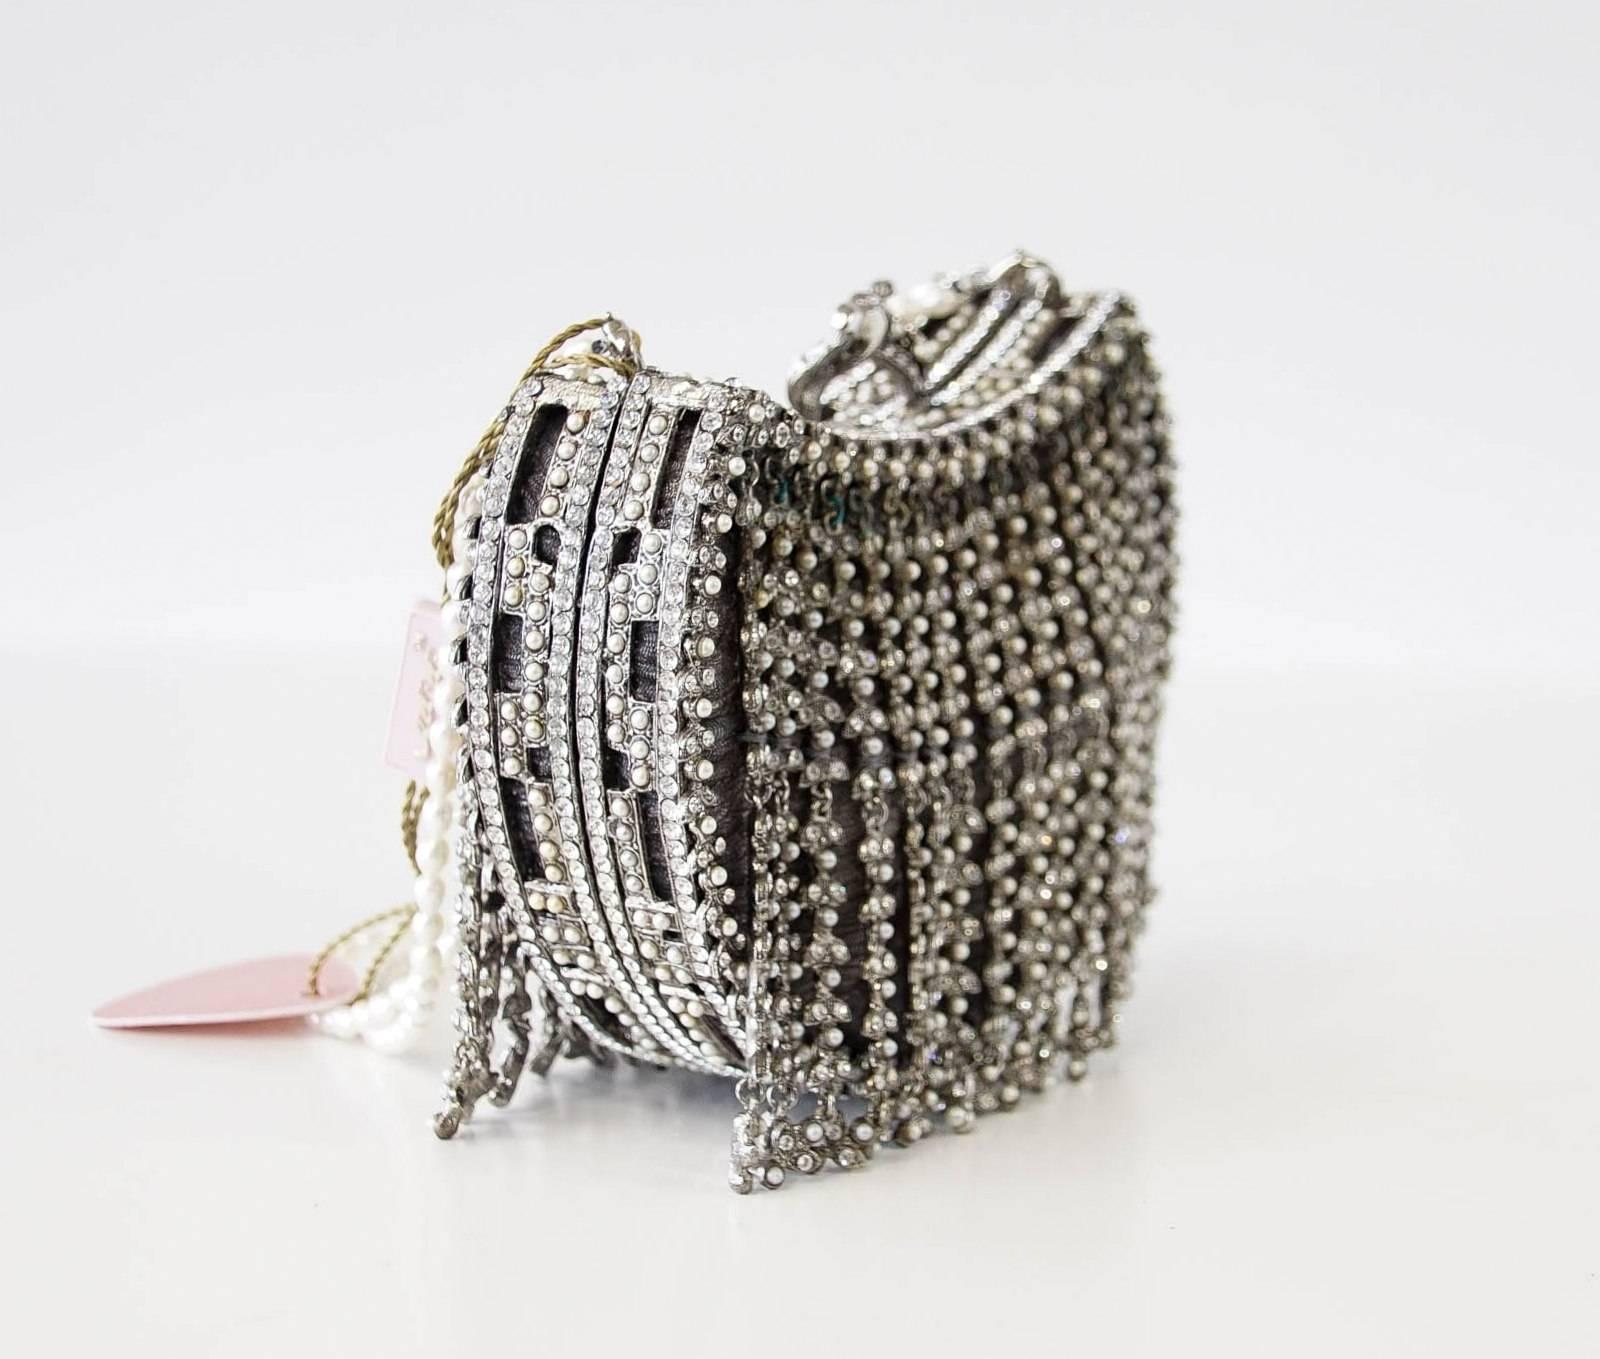 Guaranteed authentic EDIDI exquisite hand made demilune bag adorned with approximately 2000 crystals and pearls evening bag.
The diamantes and pearls fall in strands creating a fringe effect.
Underneath the fringe is a finely textured mesh like